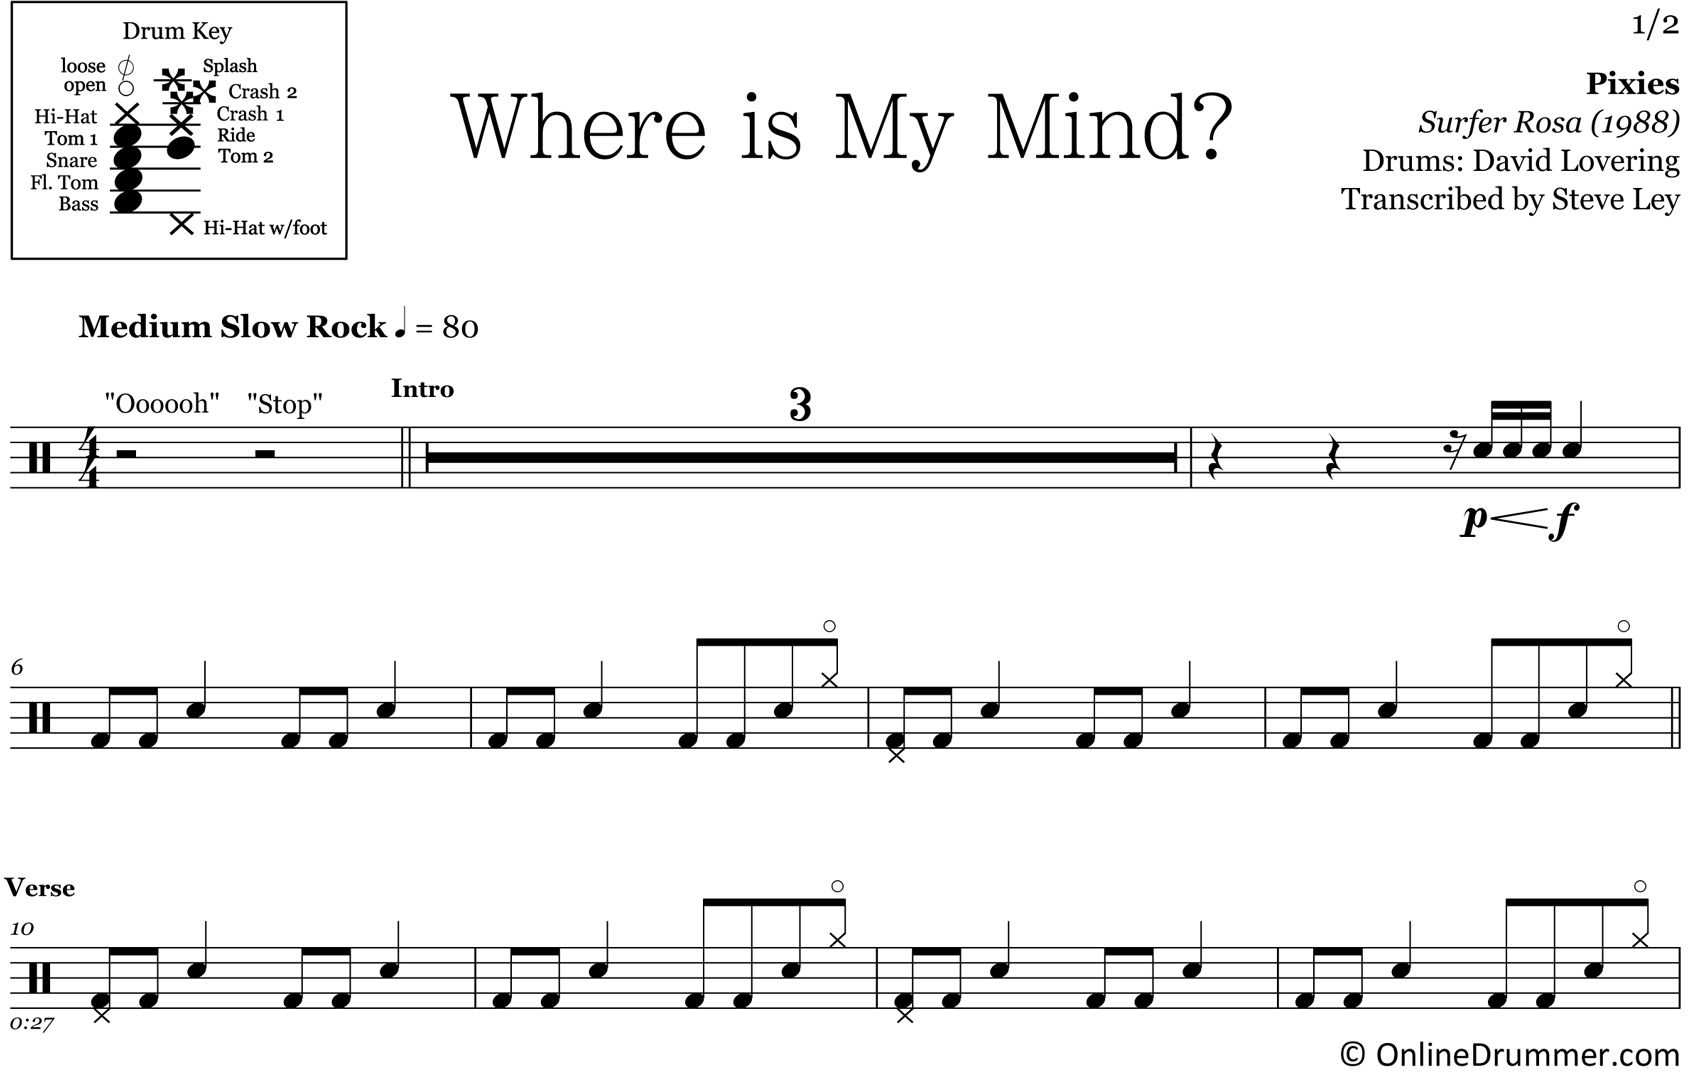 Where Is My Mind? - Pixies - Drum Sheet Music